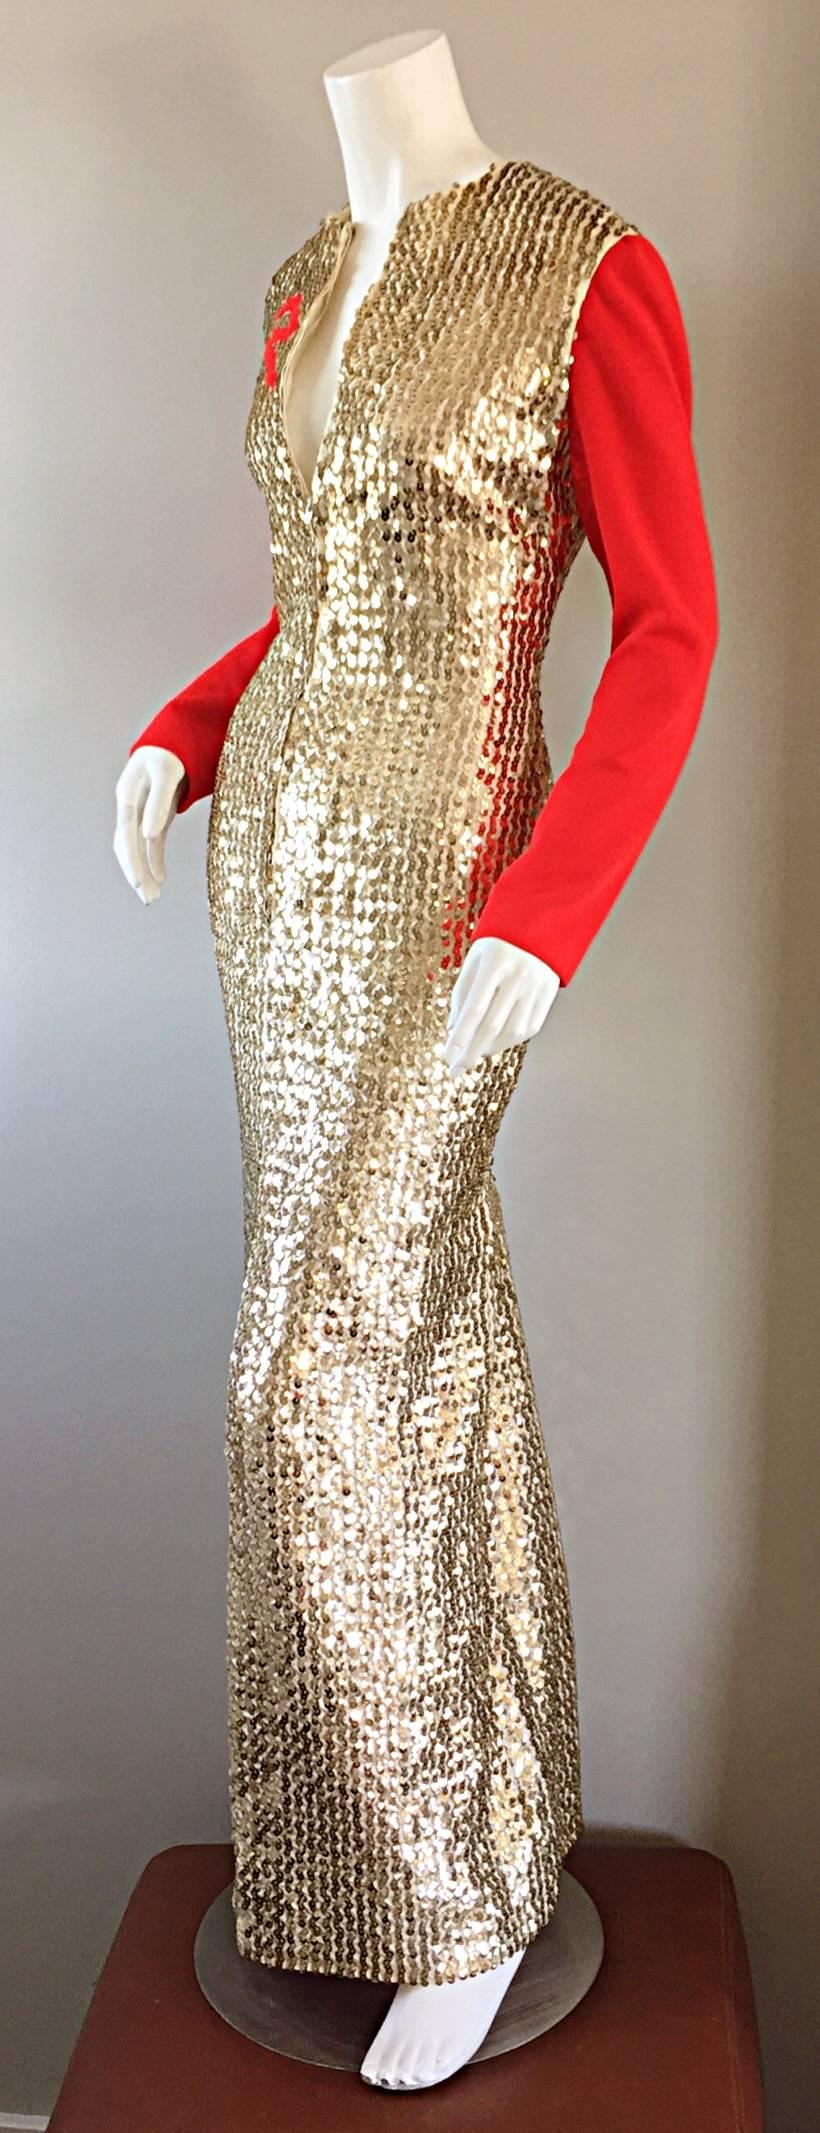 Amazing AND Rare Vintage Oscar de la Renta gold sequin dress! Embroidered with a "Red Ribbon" on the right breast. Sleek long red sleeves, and a zipper down the bodice. Encrusted with thousands of hand-sewn gold sequins. Sexy slit up the